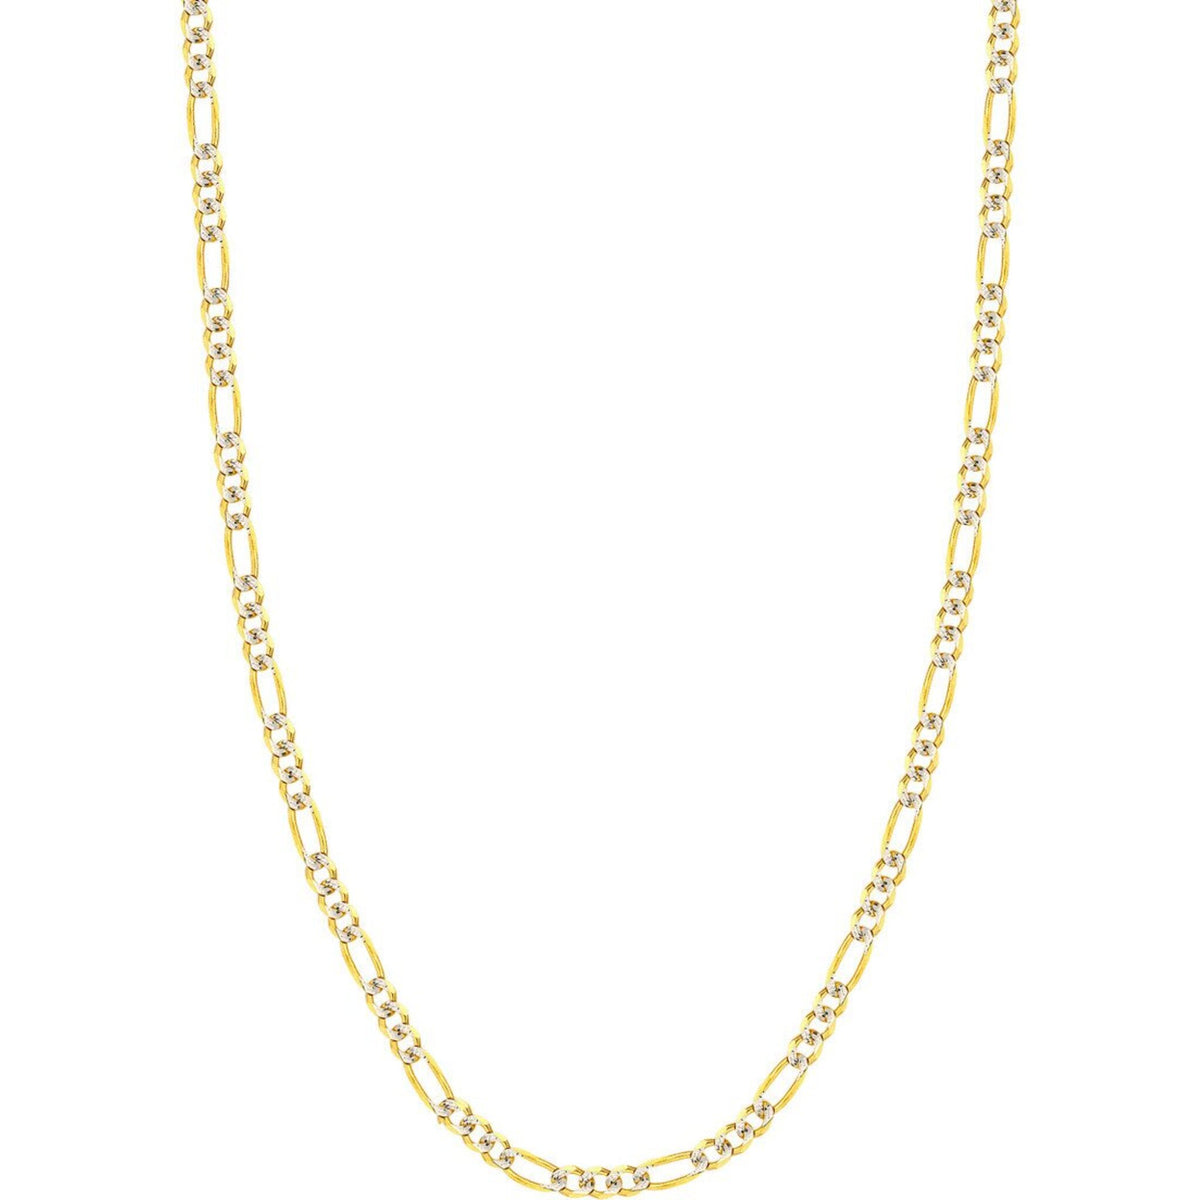 Olas d'Oro 22" Necklace - 14K Yellow/White Gold 5.8mm Two-Tone Pave Figaro Chain with Lobster Lock